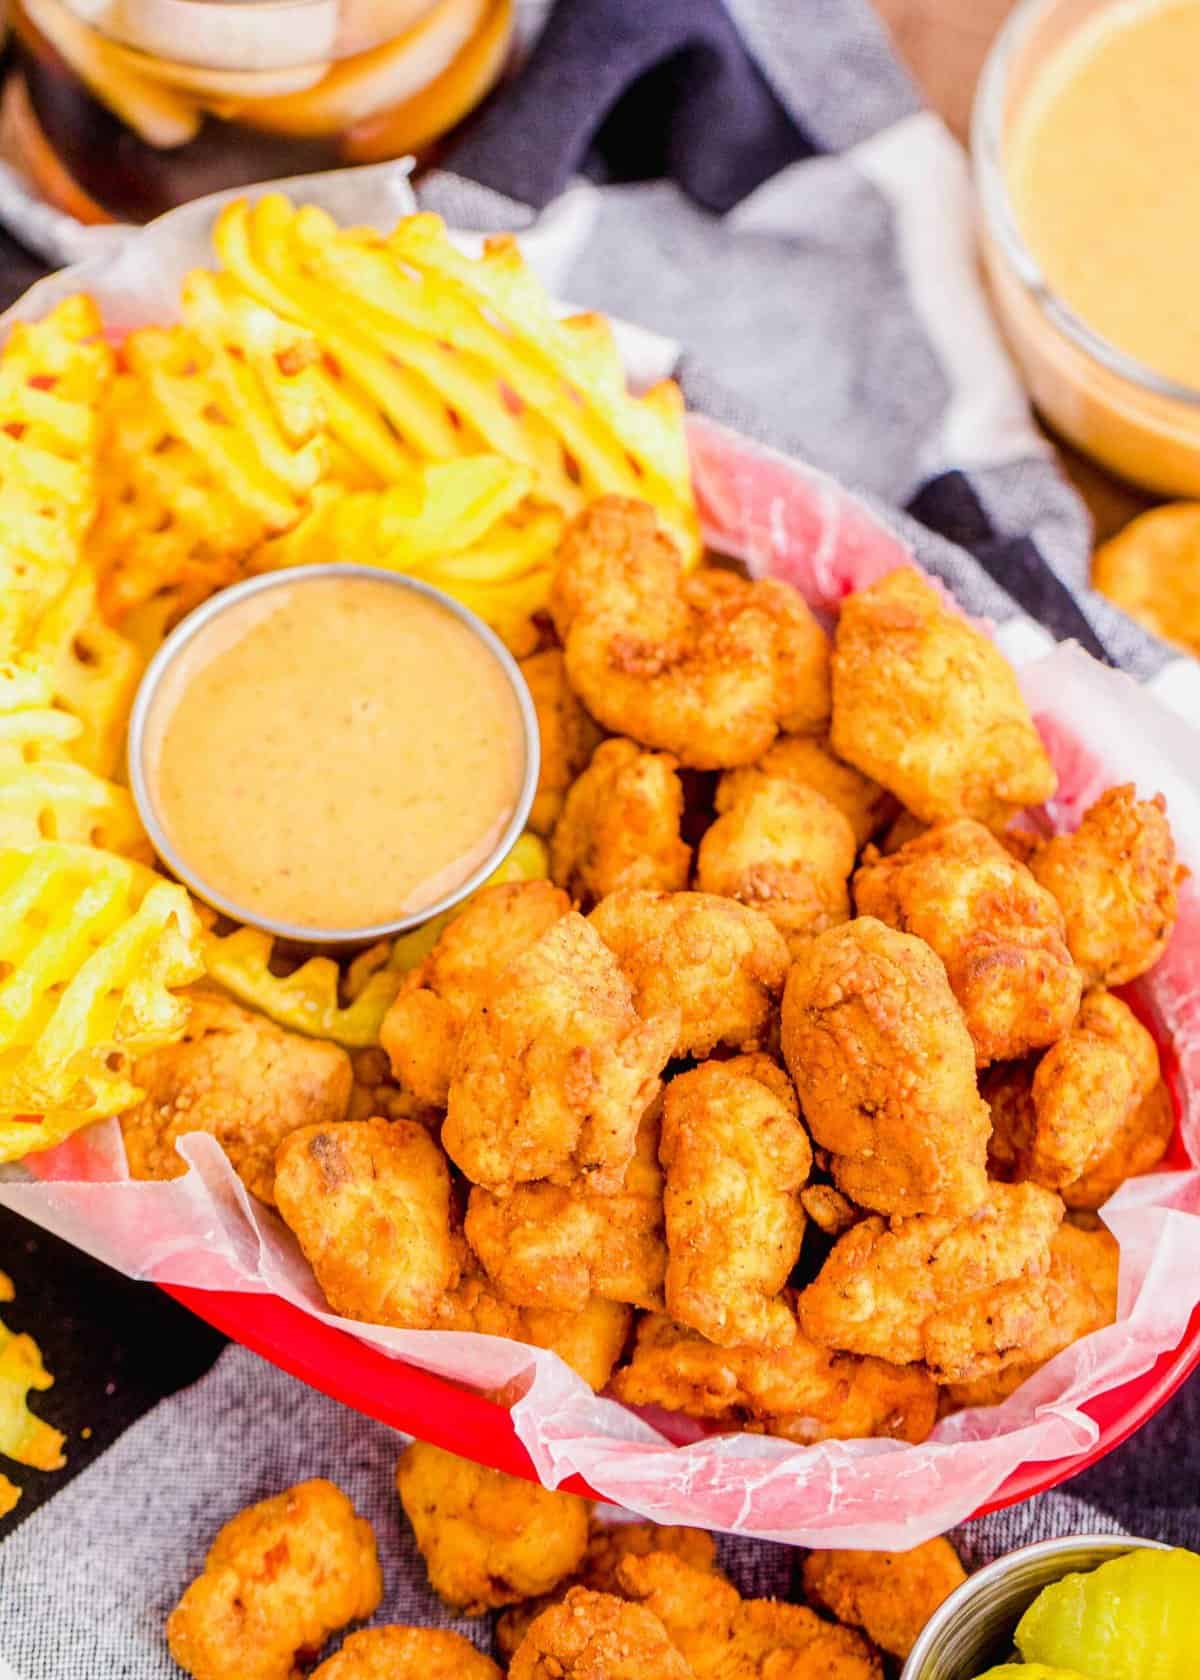 Overhead view of chicken nuggets in basket with waffle fries and dipping sauce